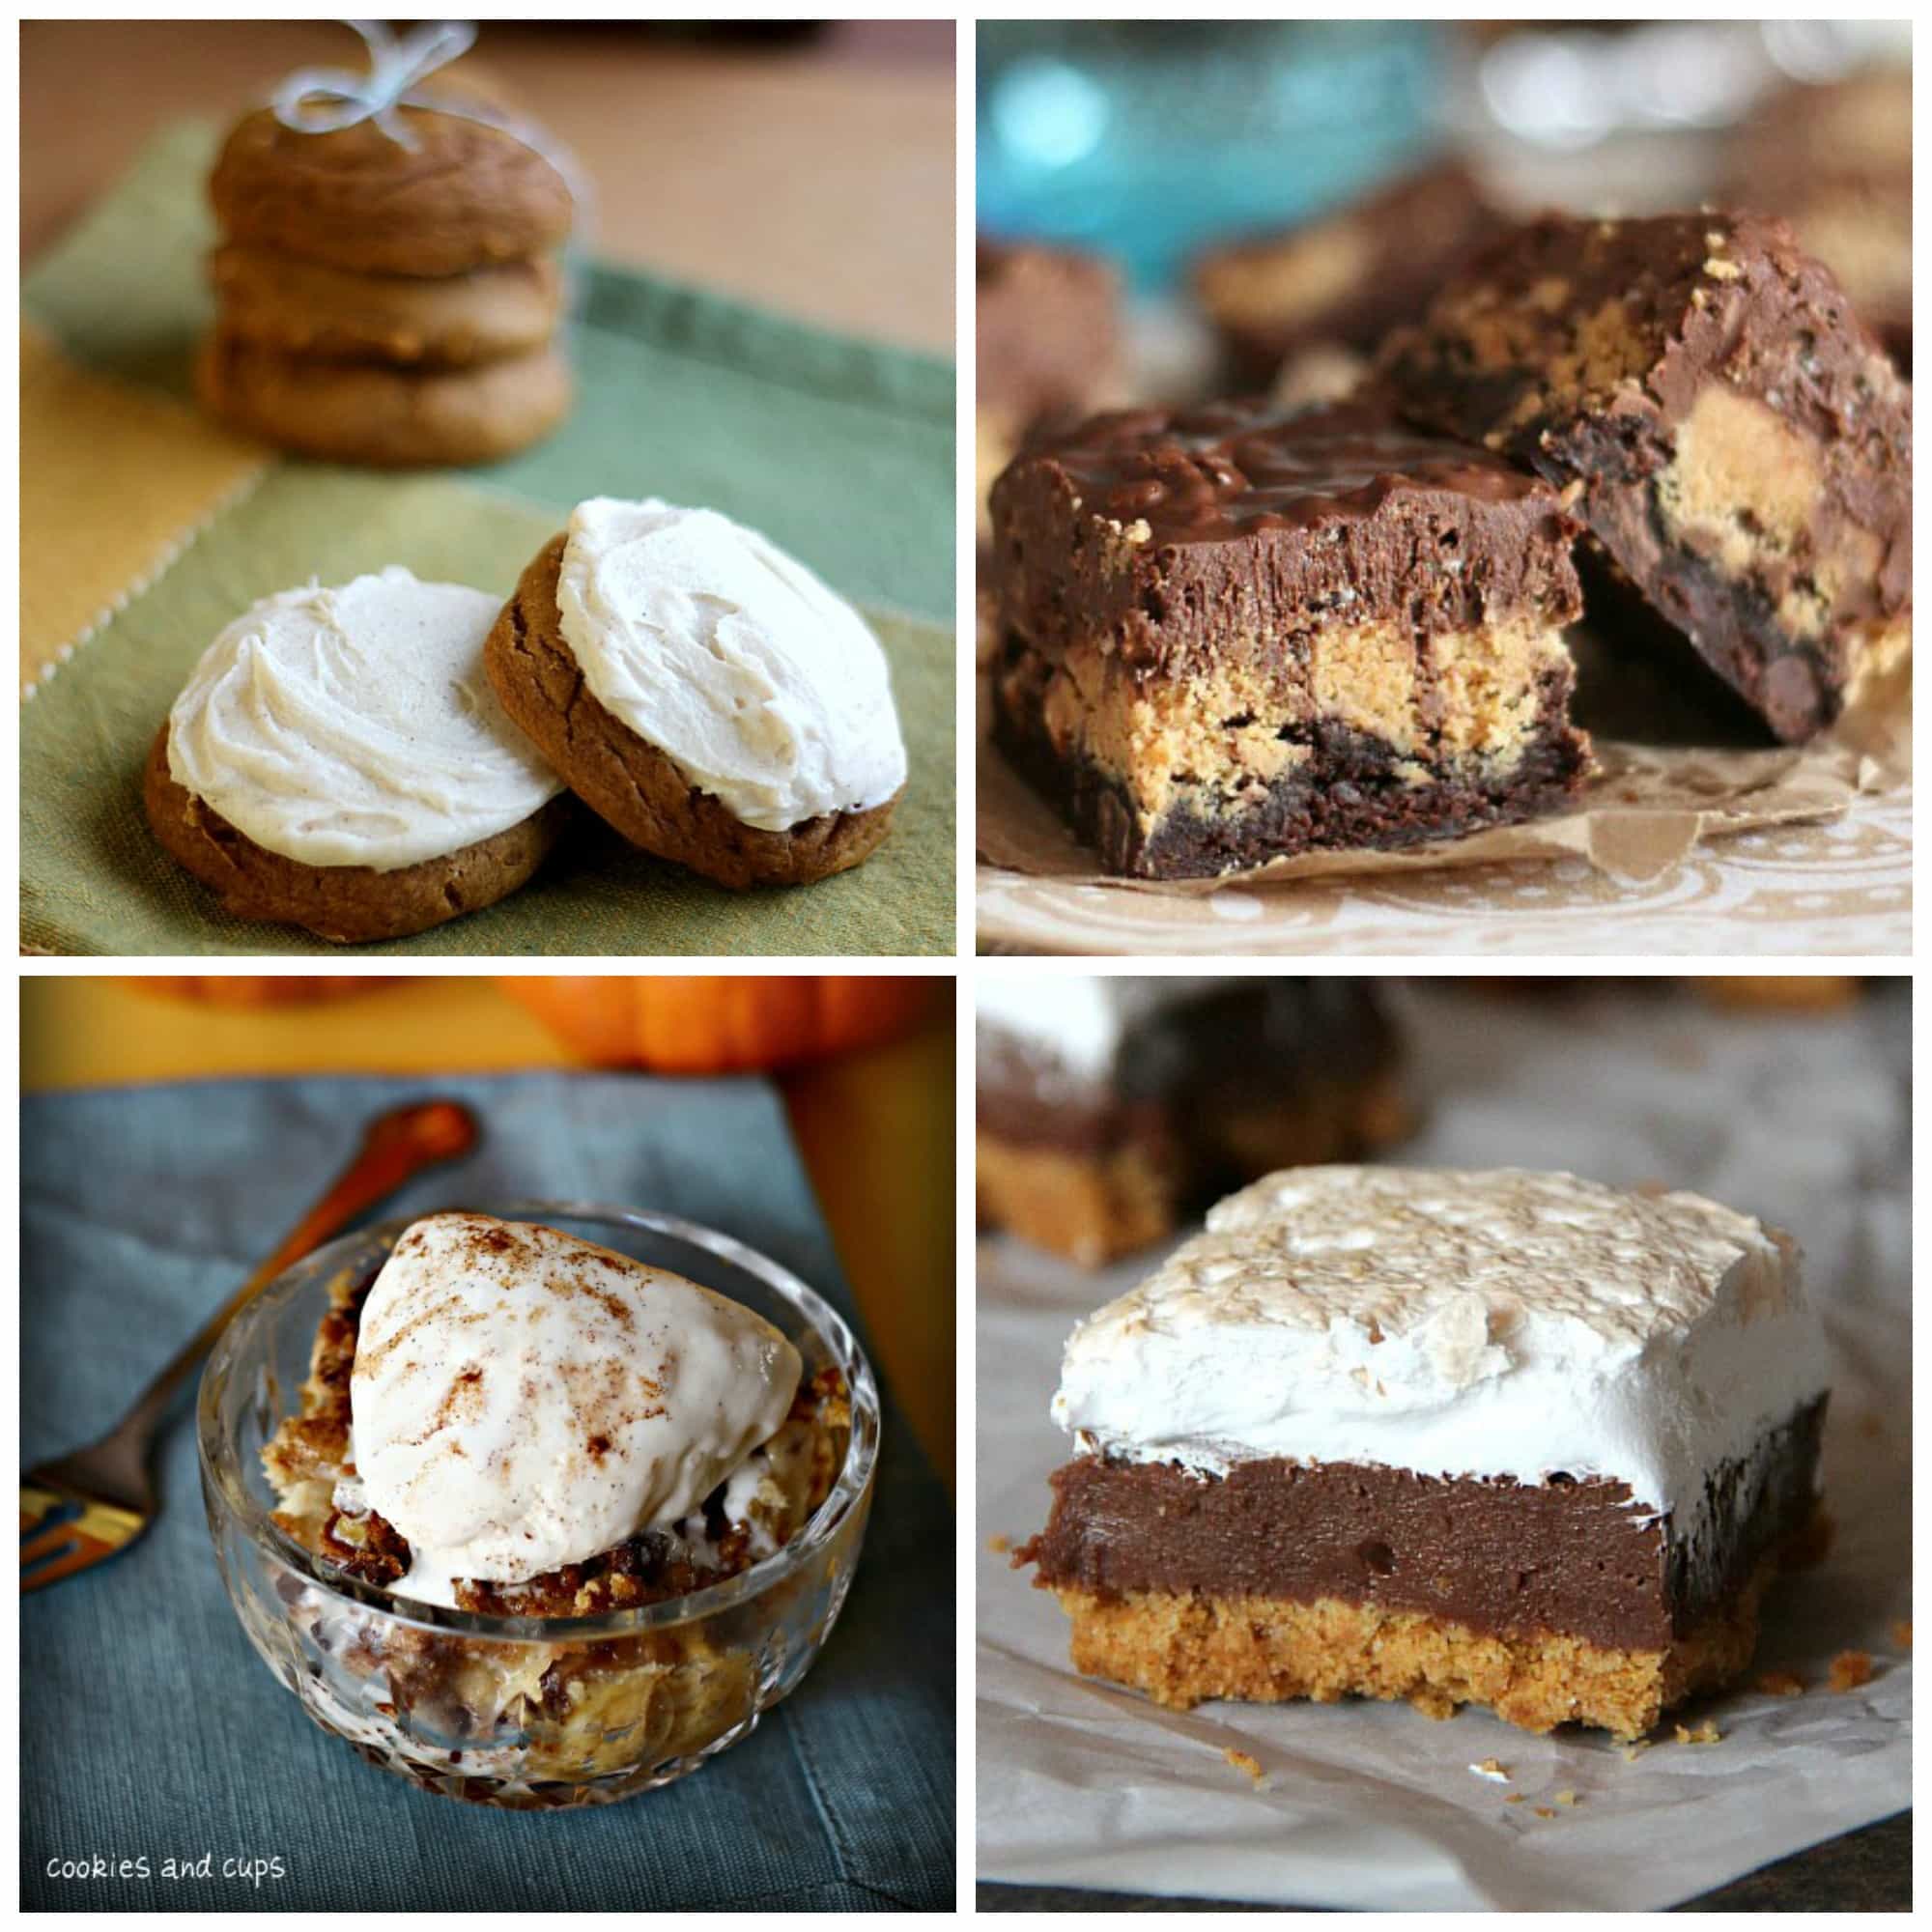 Most Popular Recipes of 2013 - Cookies and Cups